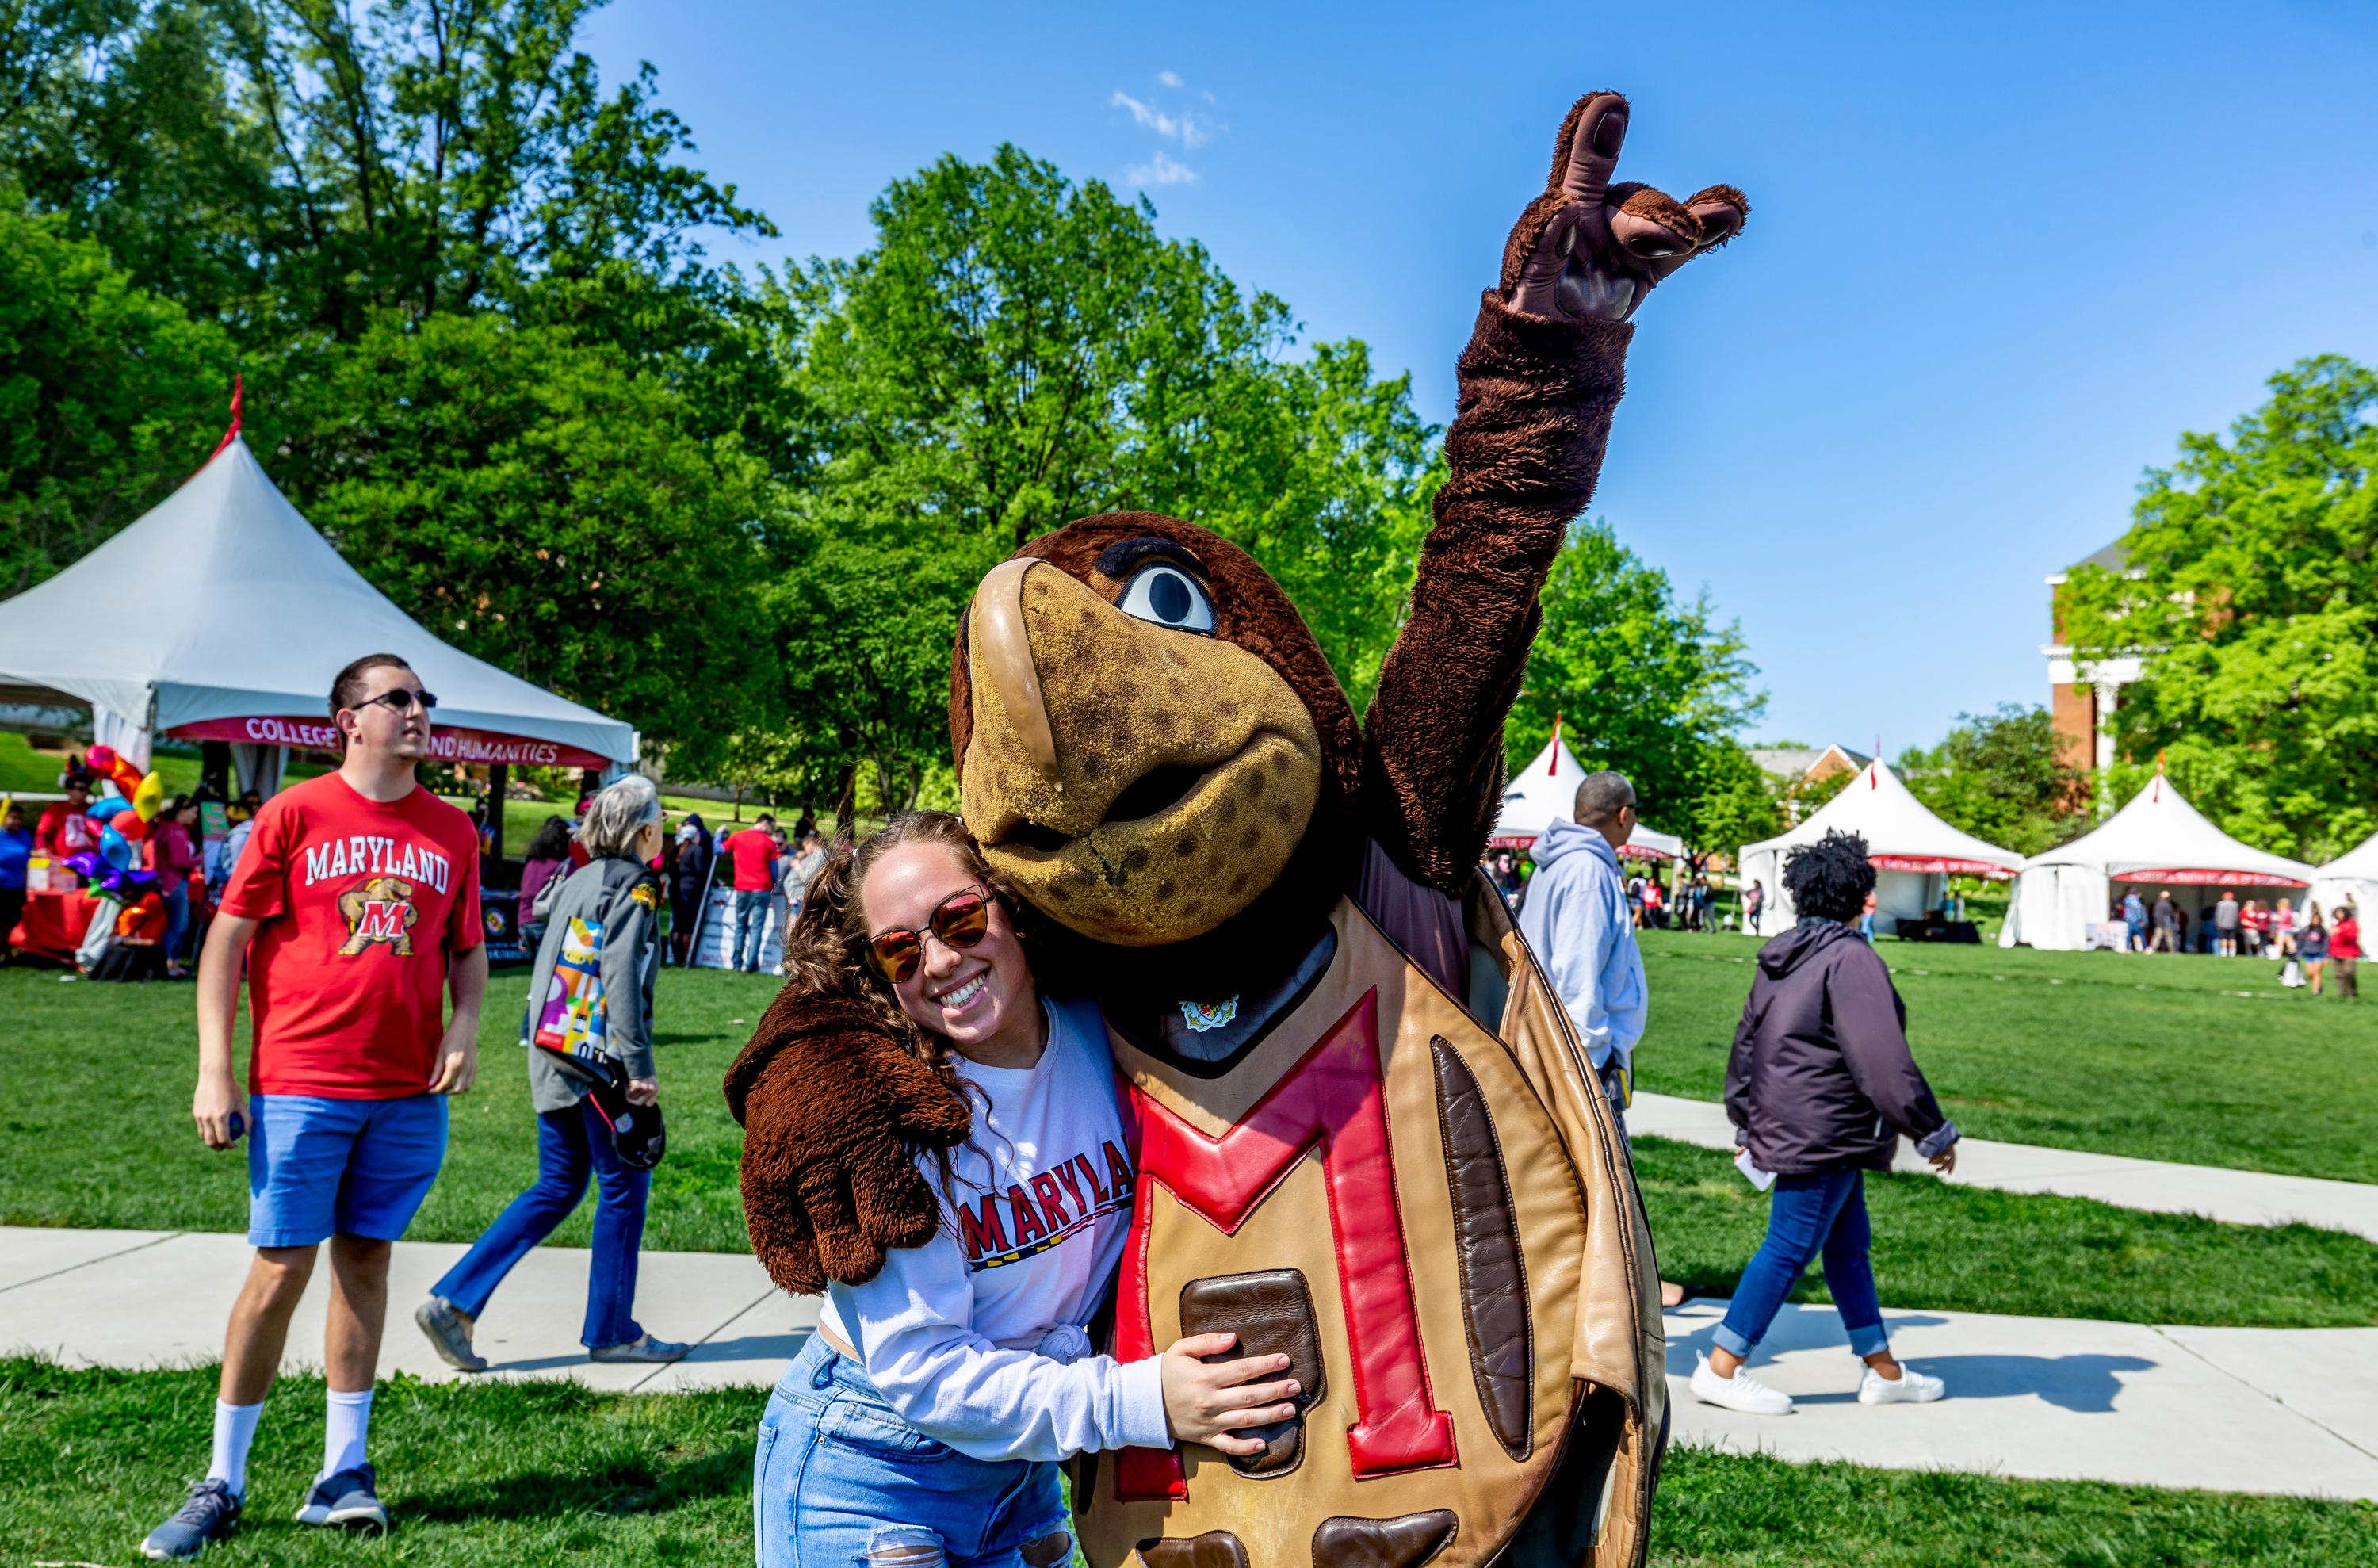 Testudo and woman in Maryland sweatshirt on Maryland Day 2019. Photo by Stephanie S. Cordle.